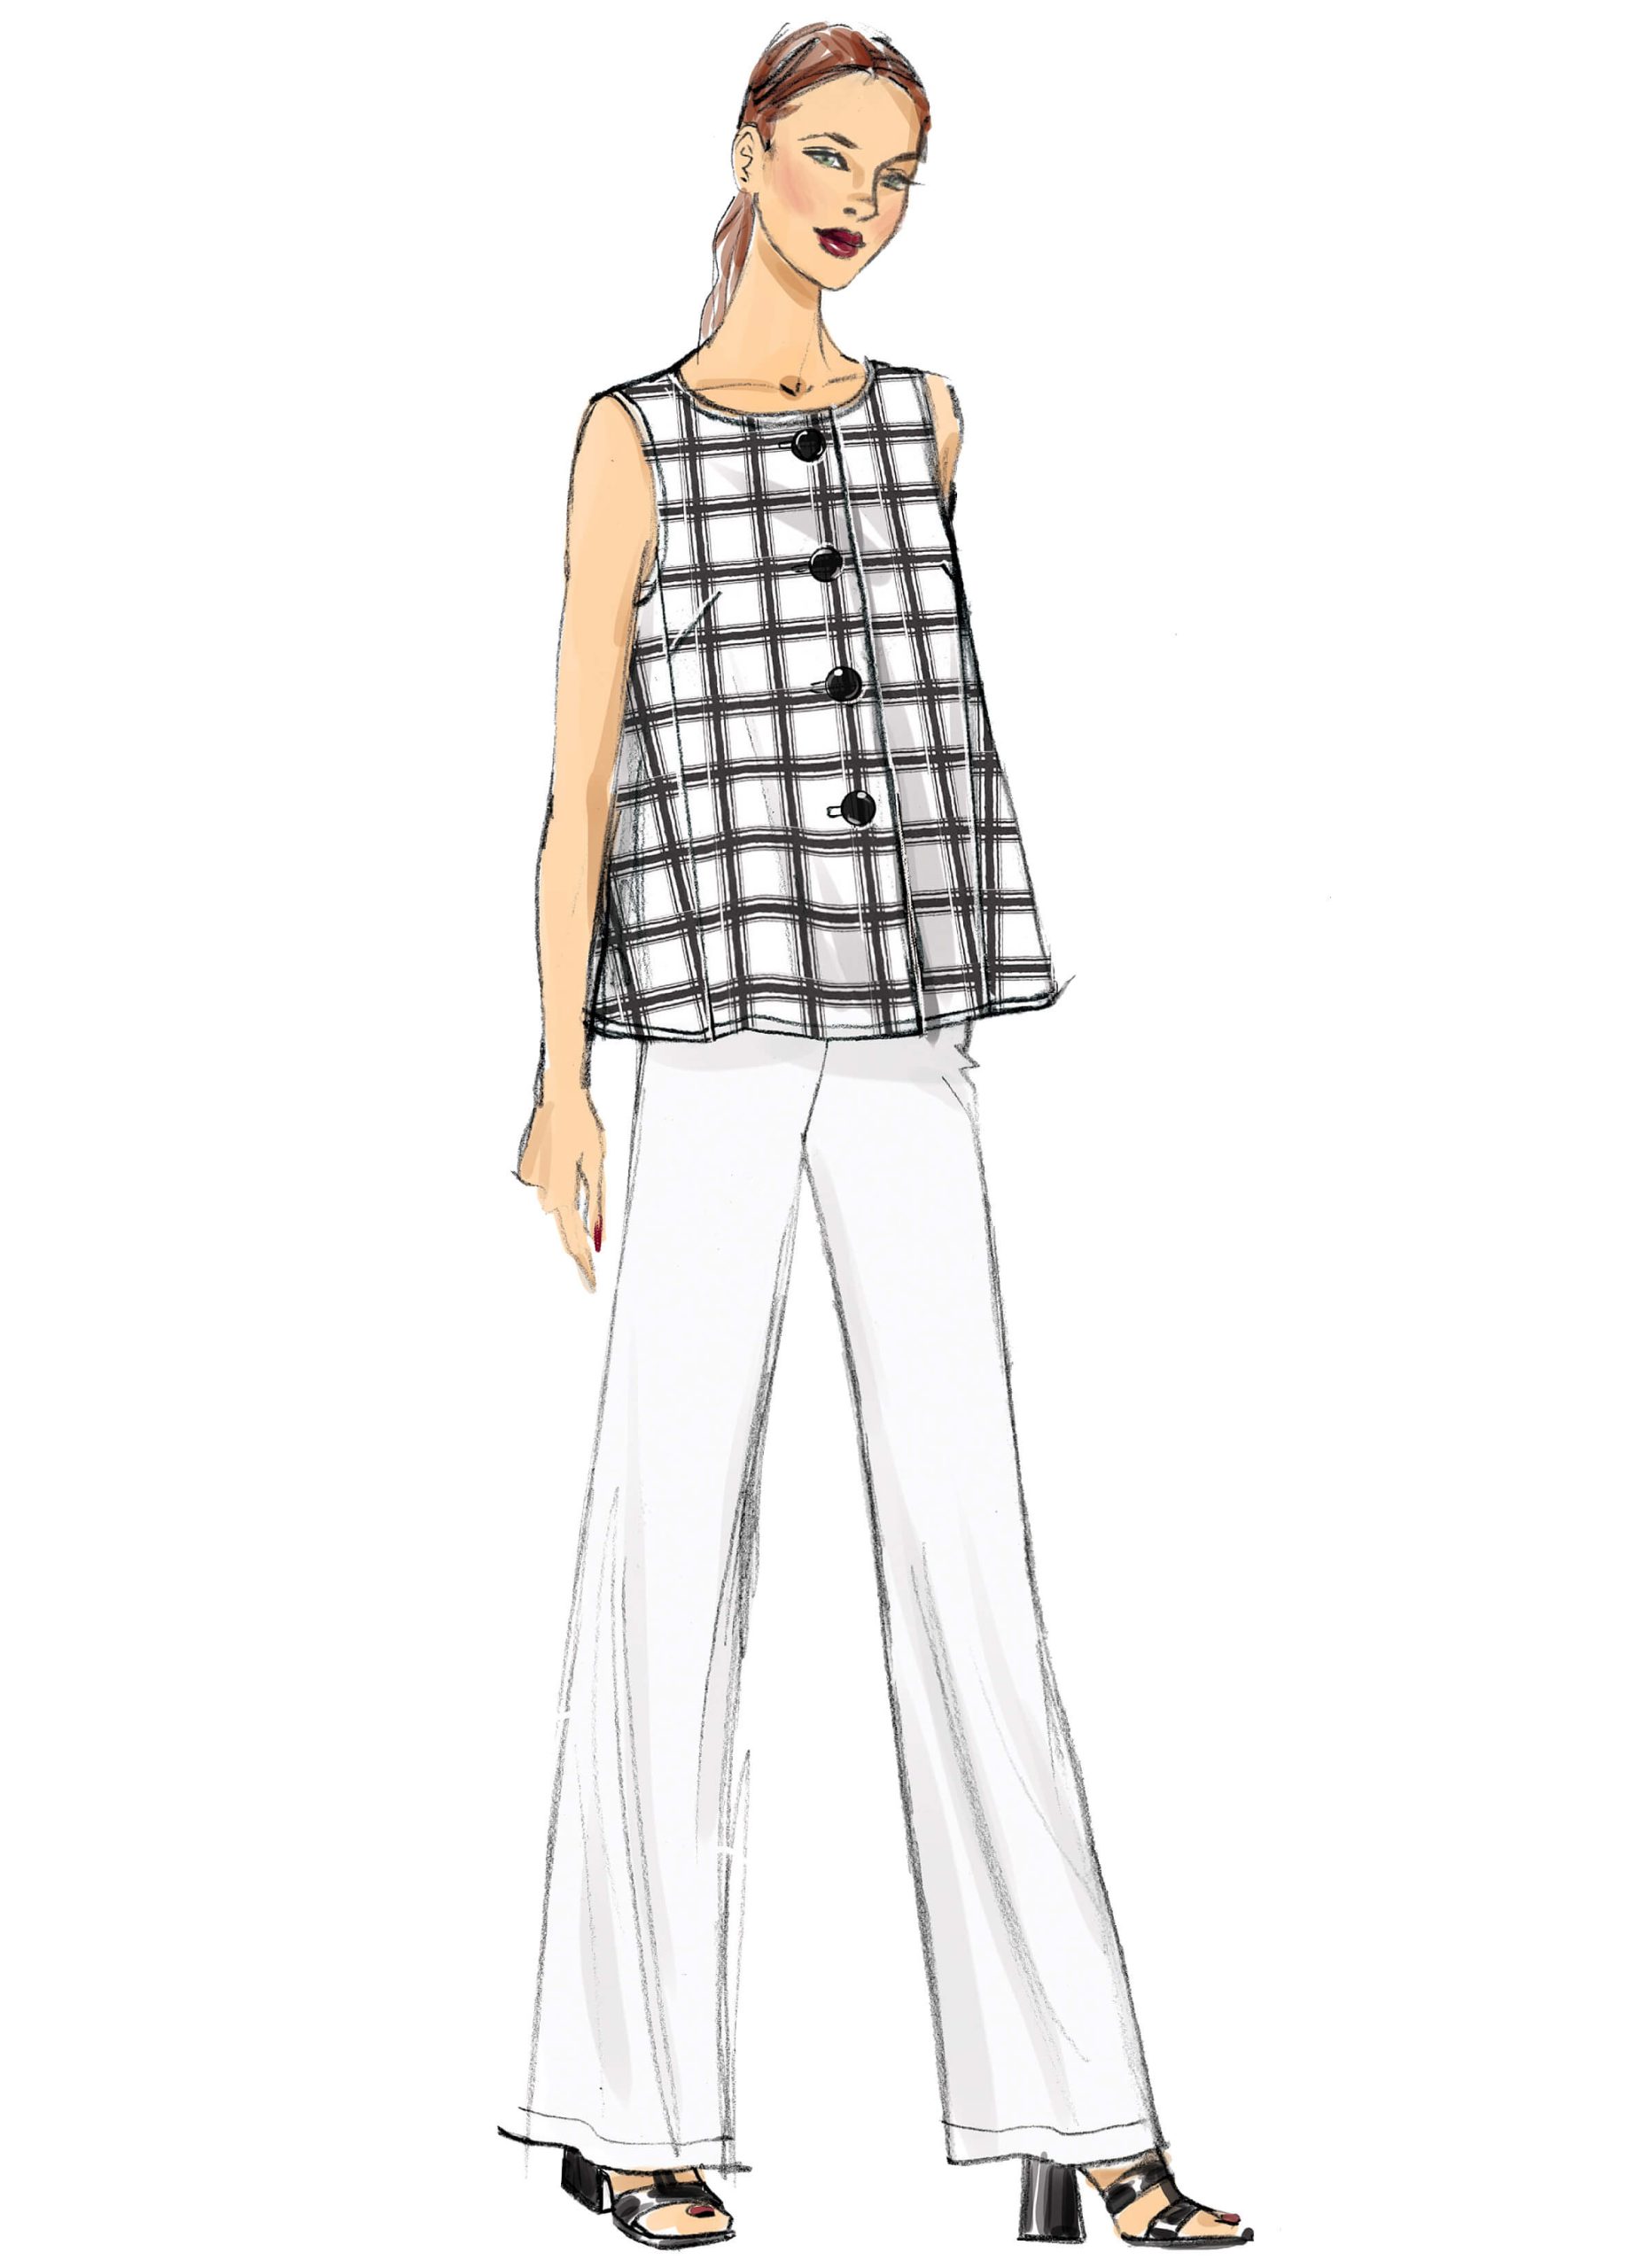 Vogue Patterns V9258 Misses' Sleeveless Tops with Pull-On Pants